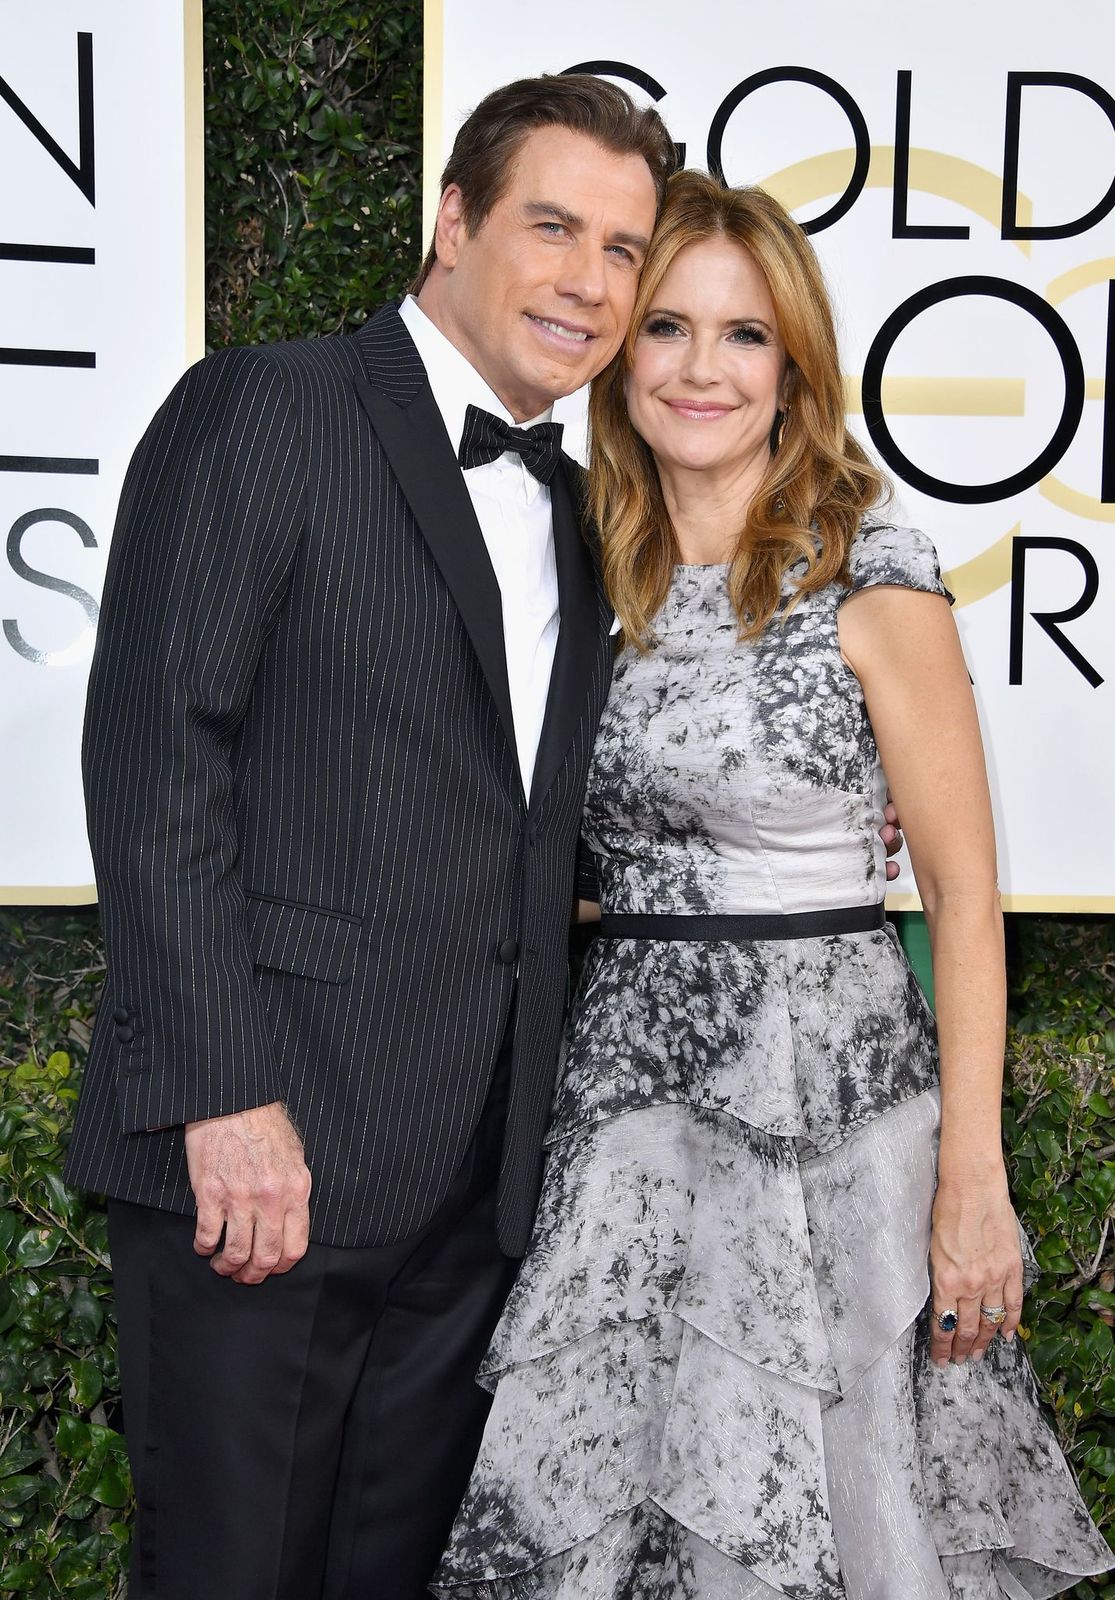 John Travolta and wife Kelly Preston at the 74th Annual Golden Globe Awards on January 8, 2017, in Beverly Hills, California Photo: Steve Granitz/WireImage/Getty Images